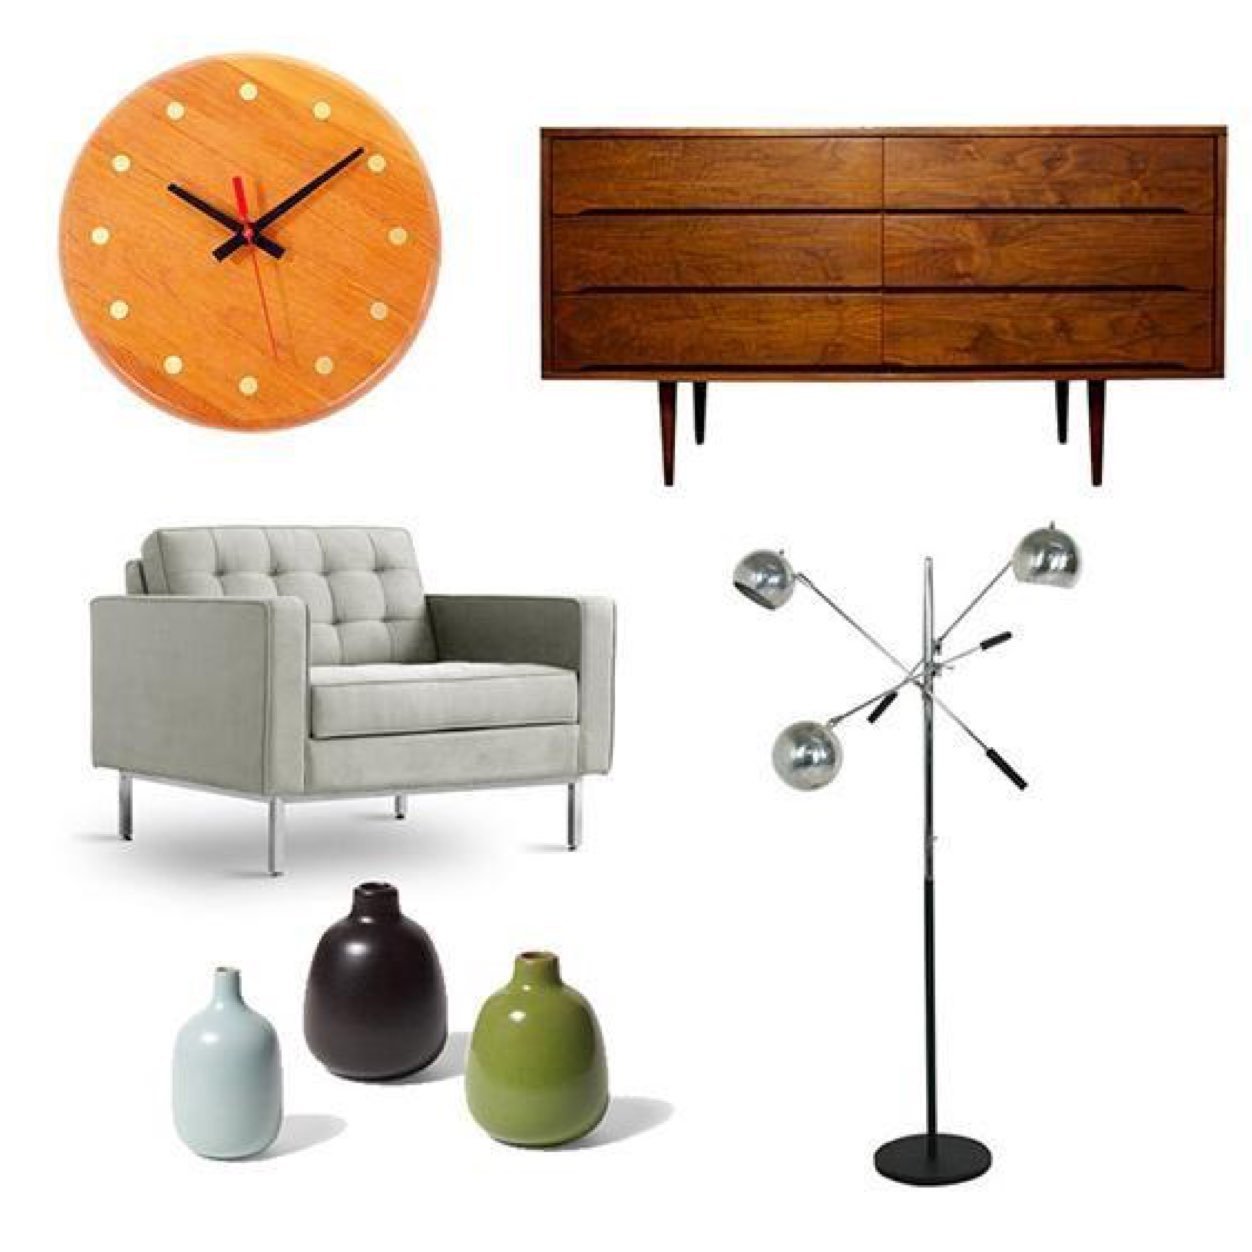 suppliers and enthusiasts of midcentury and retro design